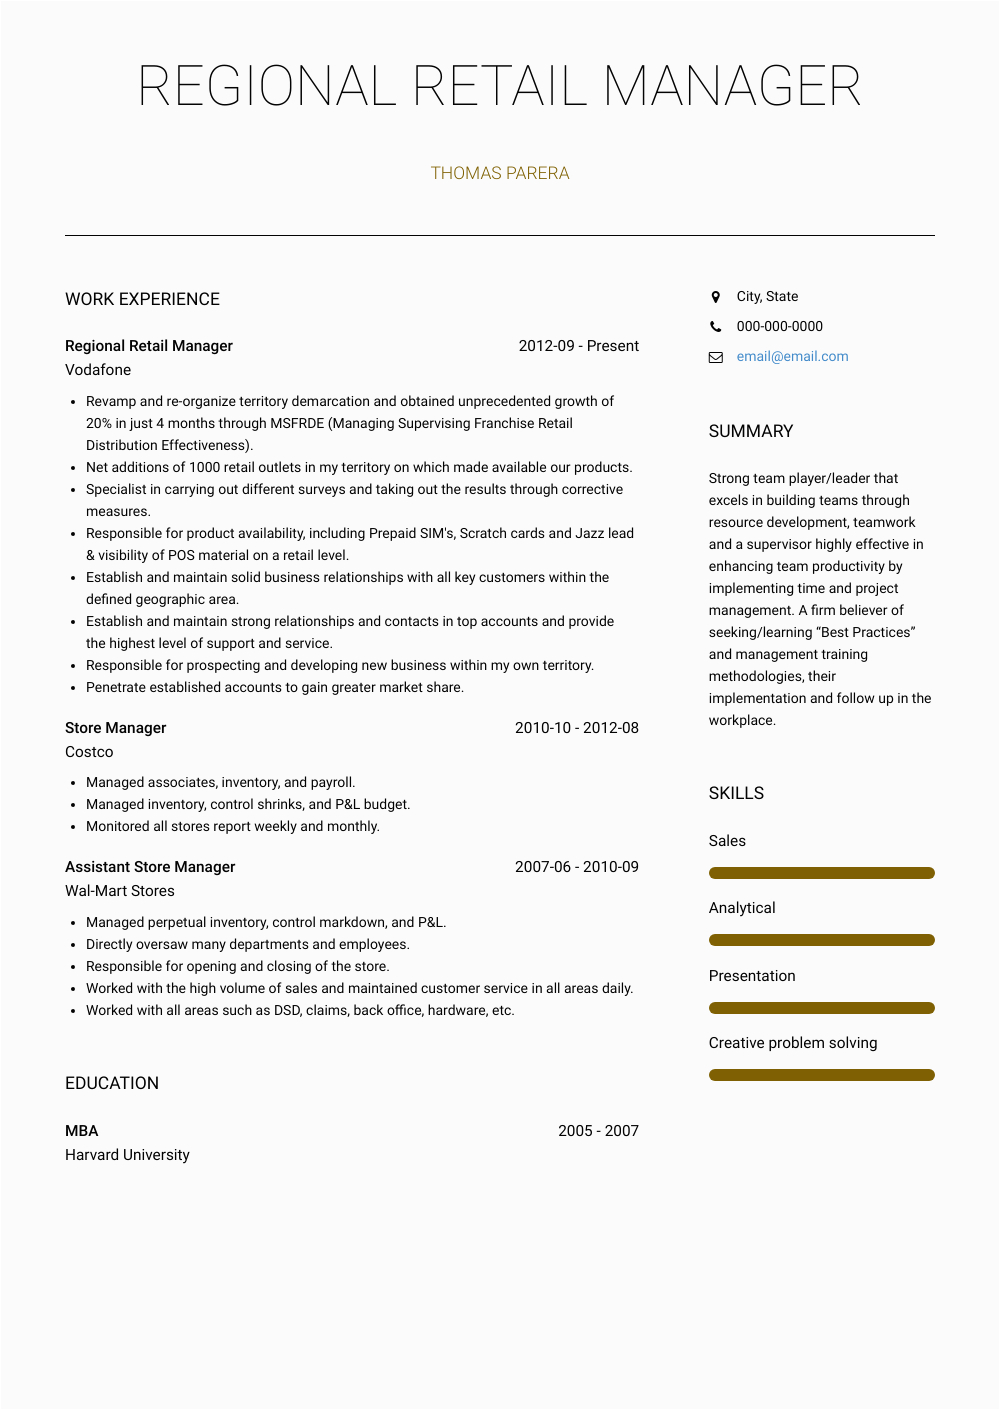 Resume Samples for Retail Store Jobs Retail Resume Samples and Templates